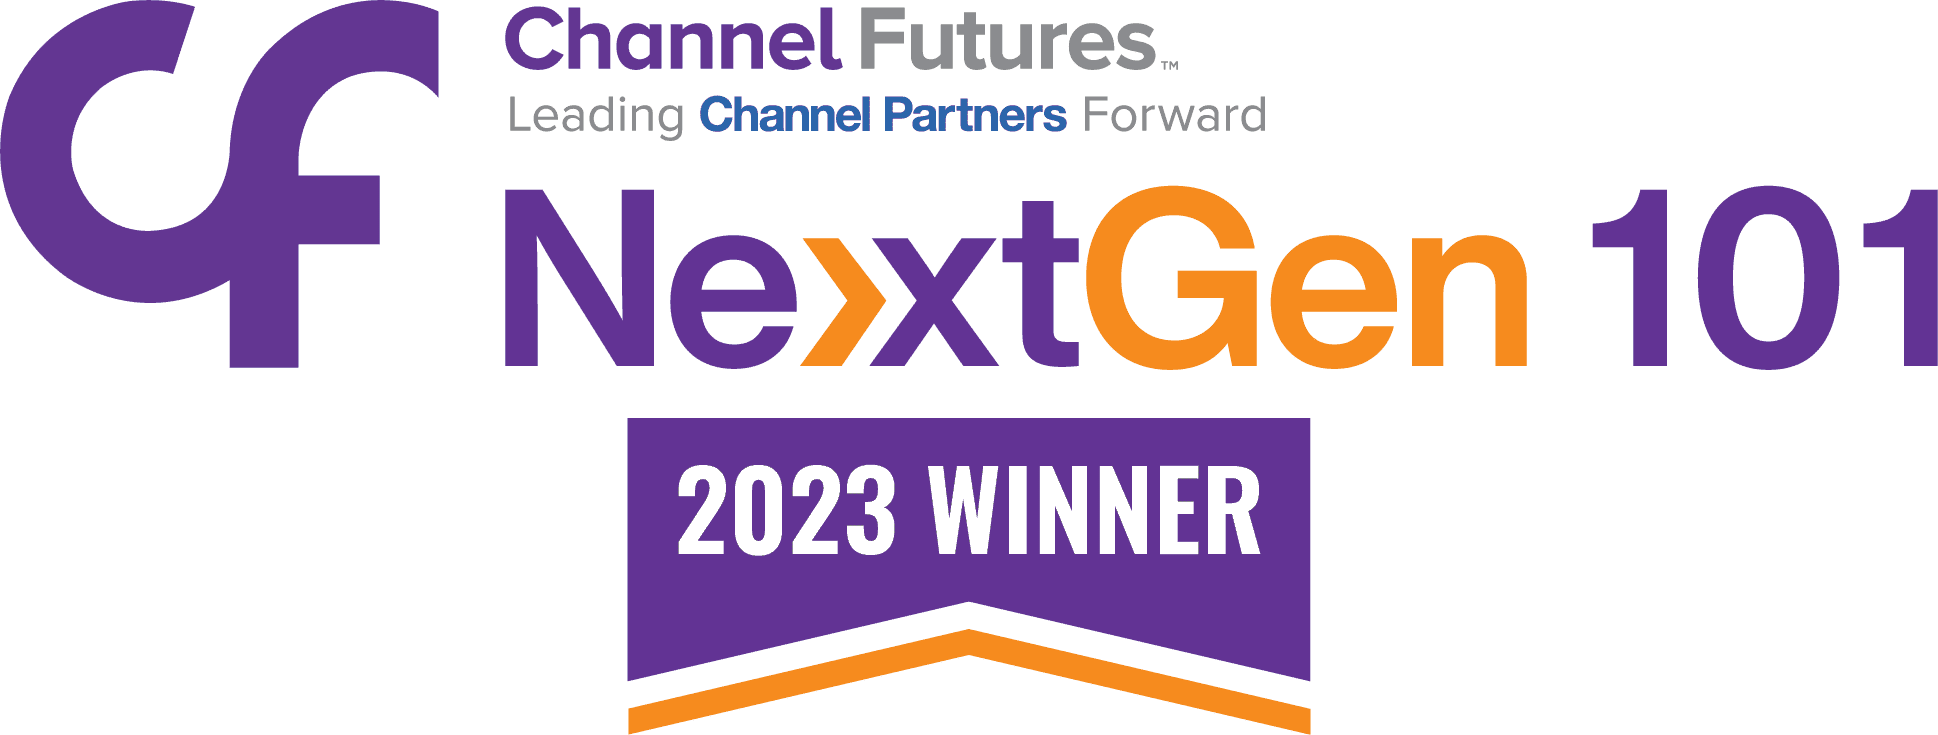 Winner logo for Channel Futures NextGen 1010, for business that provides outsourced IT solutions.